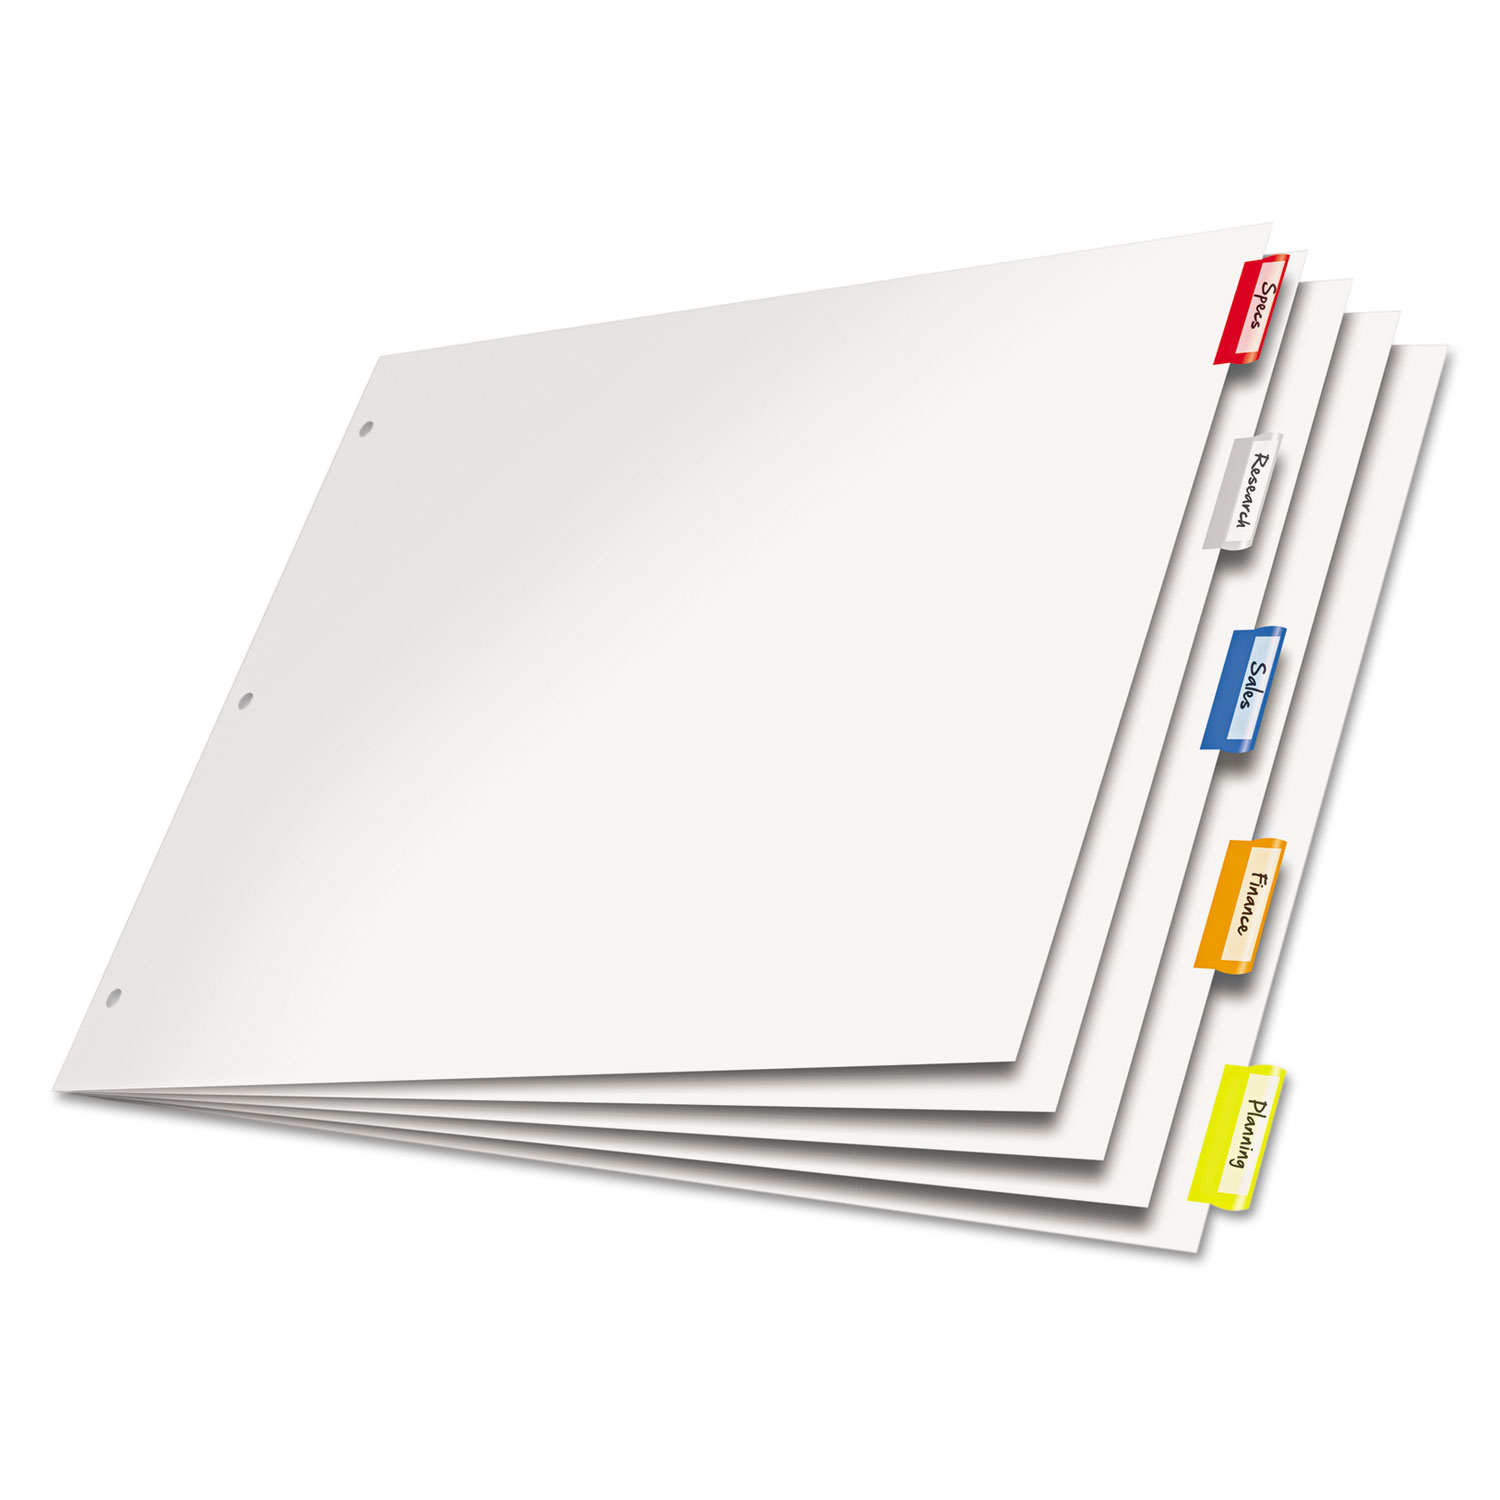  Cardinal 84814 Paper Insertable Dividers, 5-Tab, 11 x 17, White, 1 Set (CRD84814) 